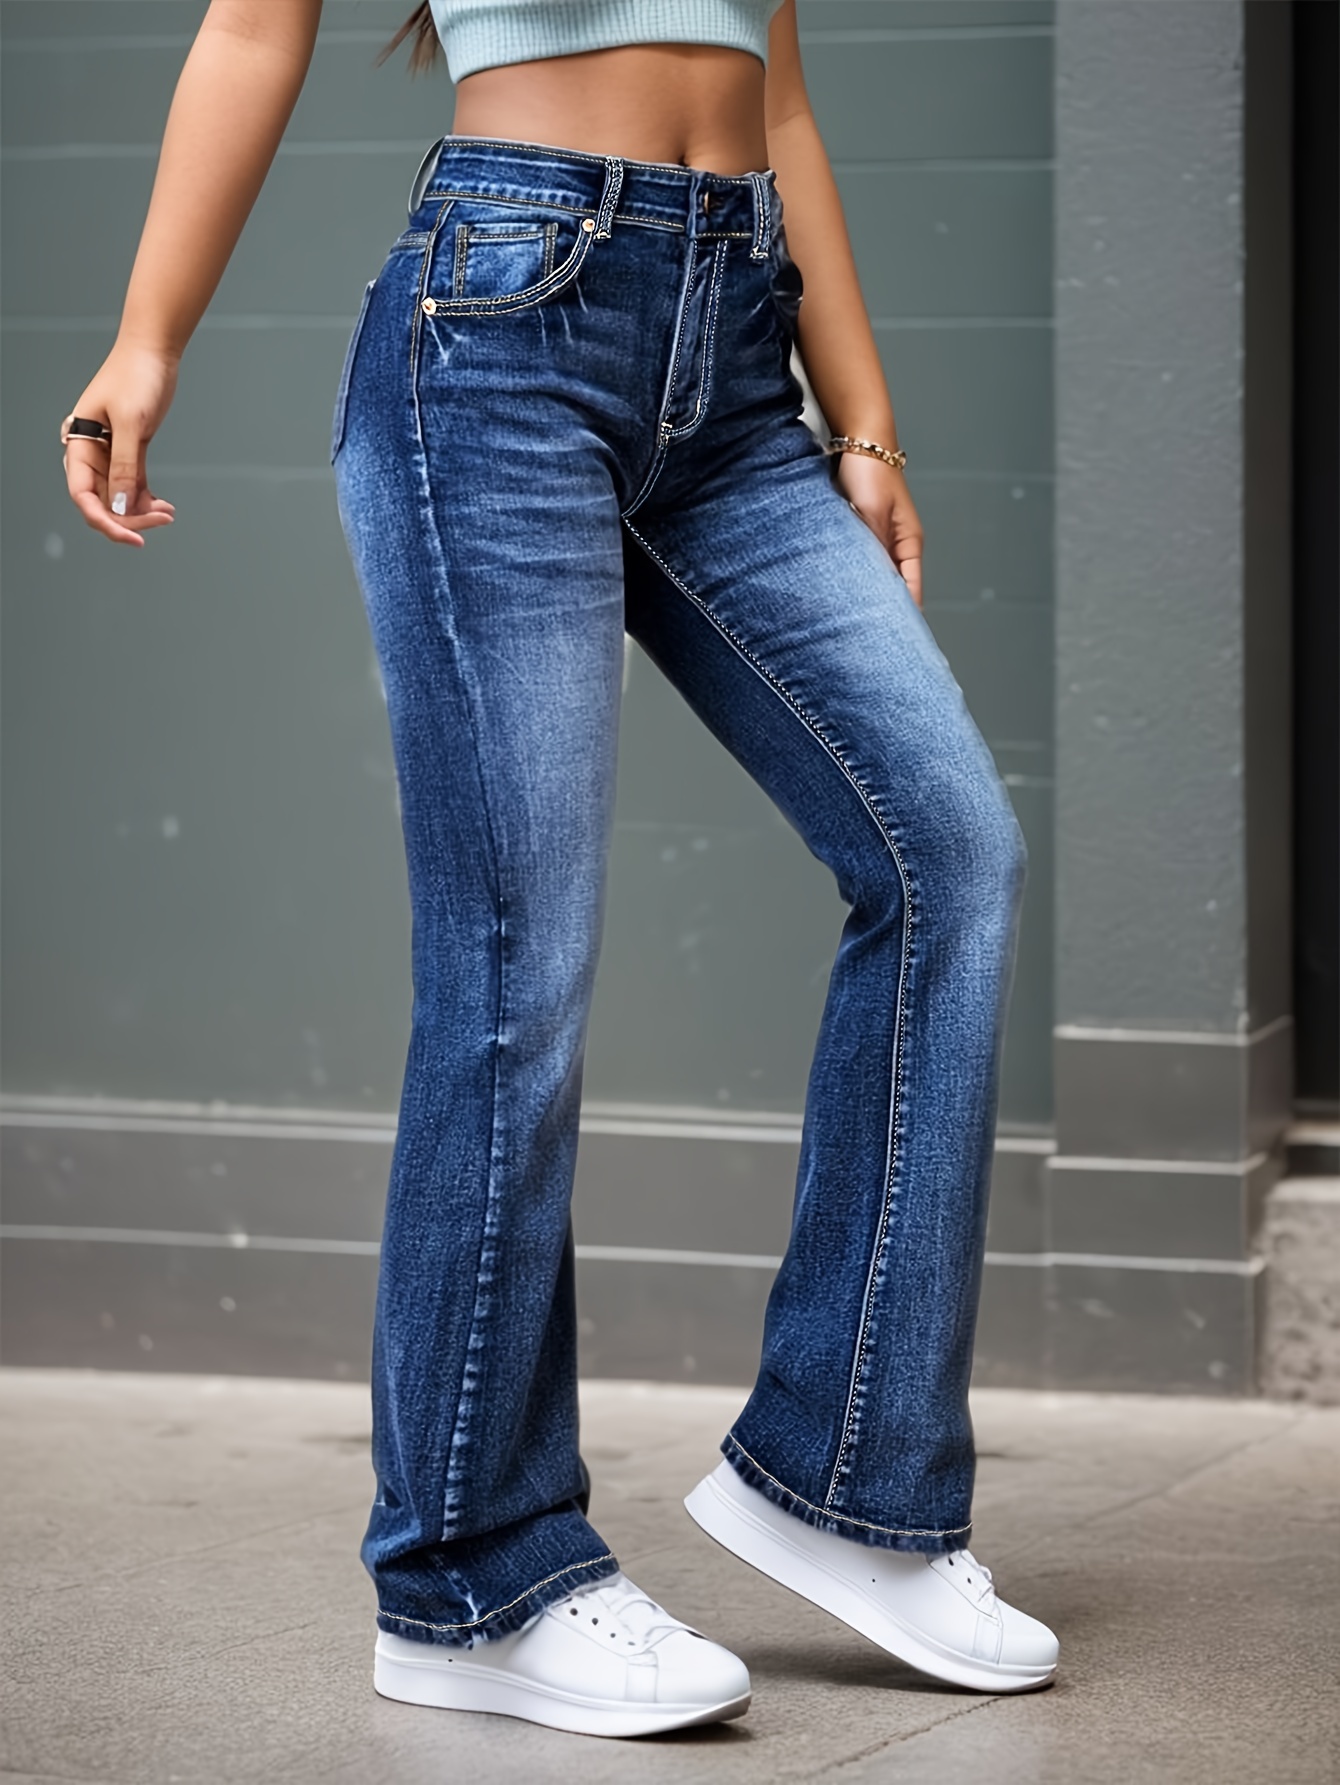 blue water ripple embossed flare jeans high waist high stretch washed denim trousers womens denim jeans clothing details 7